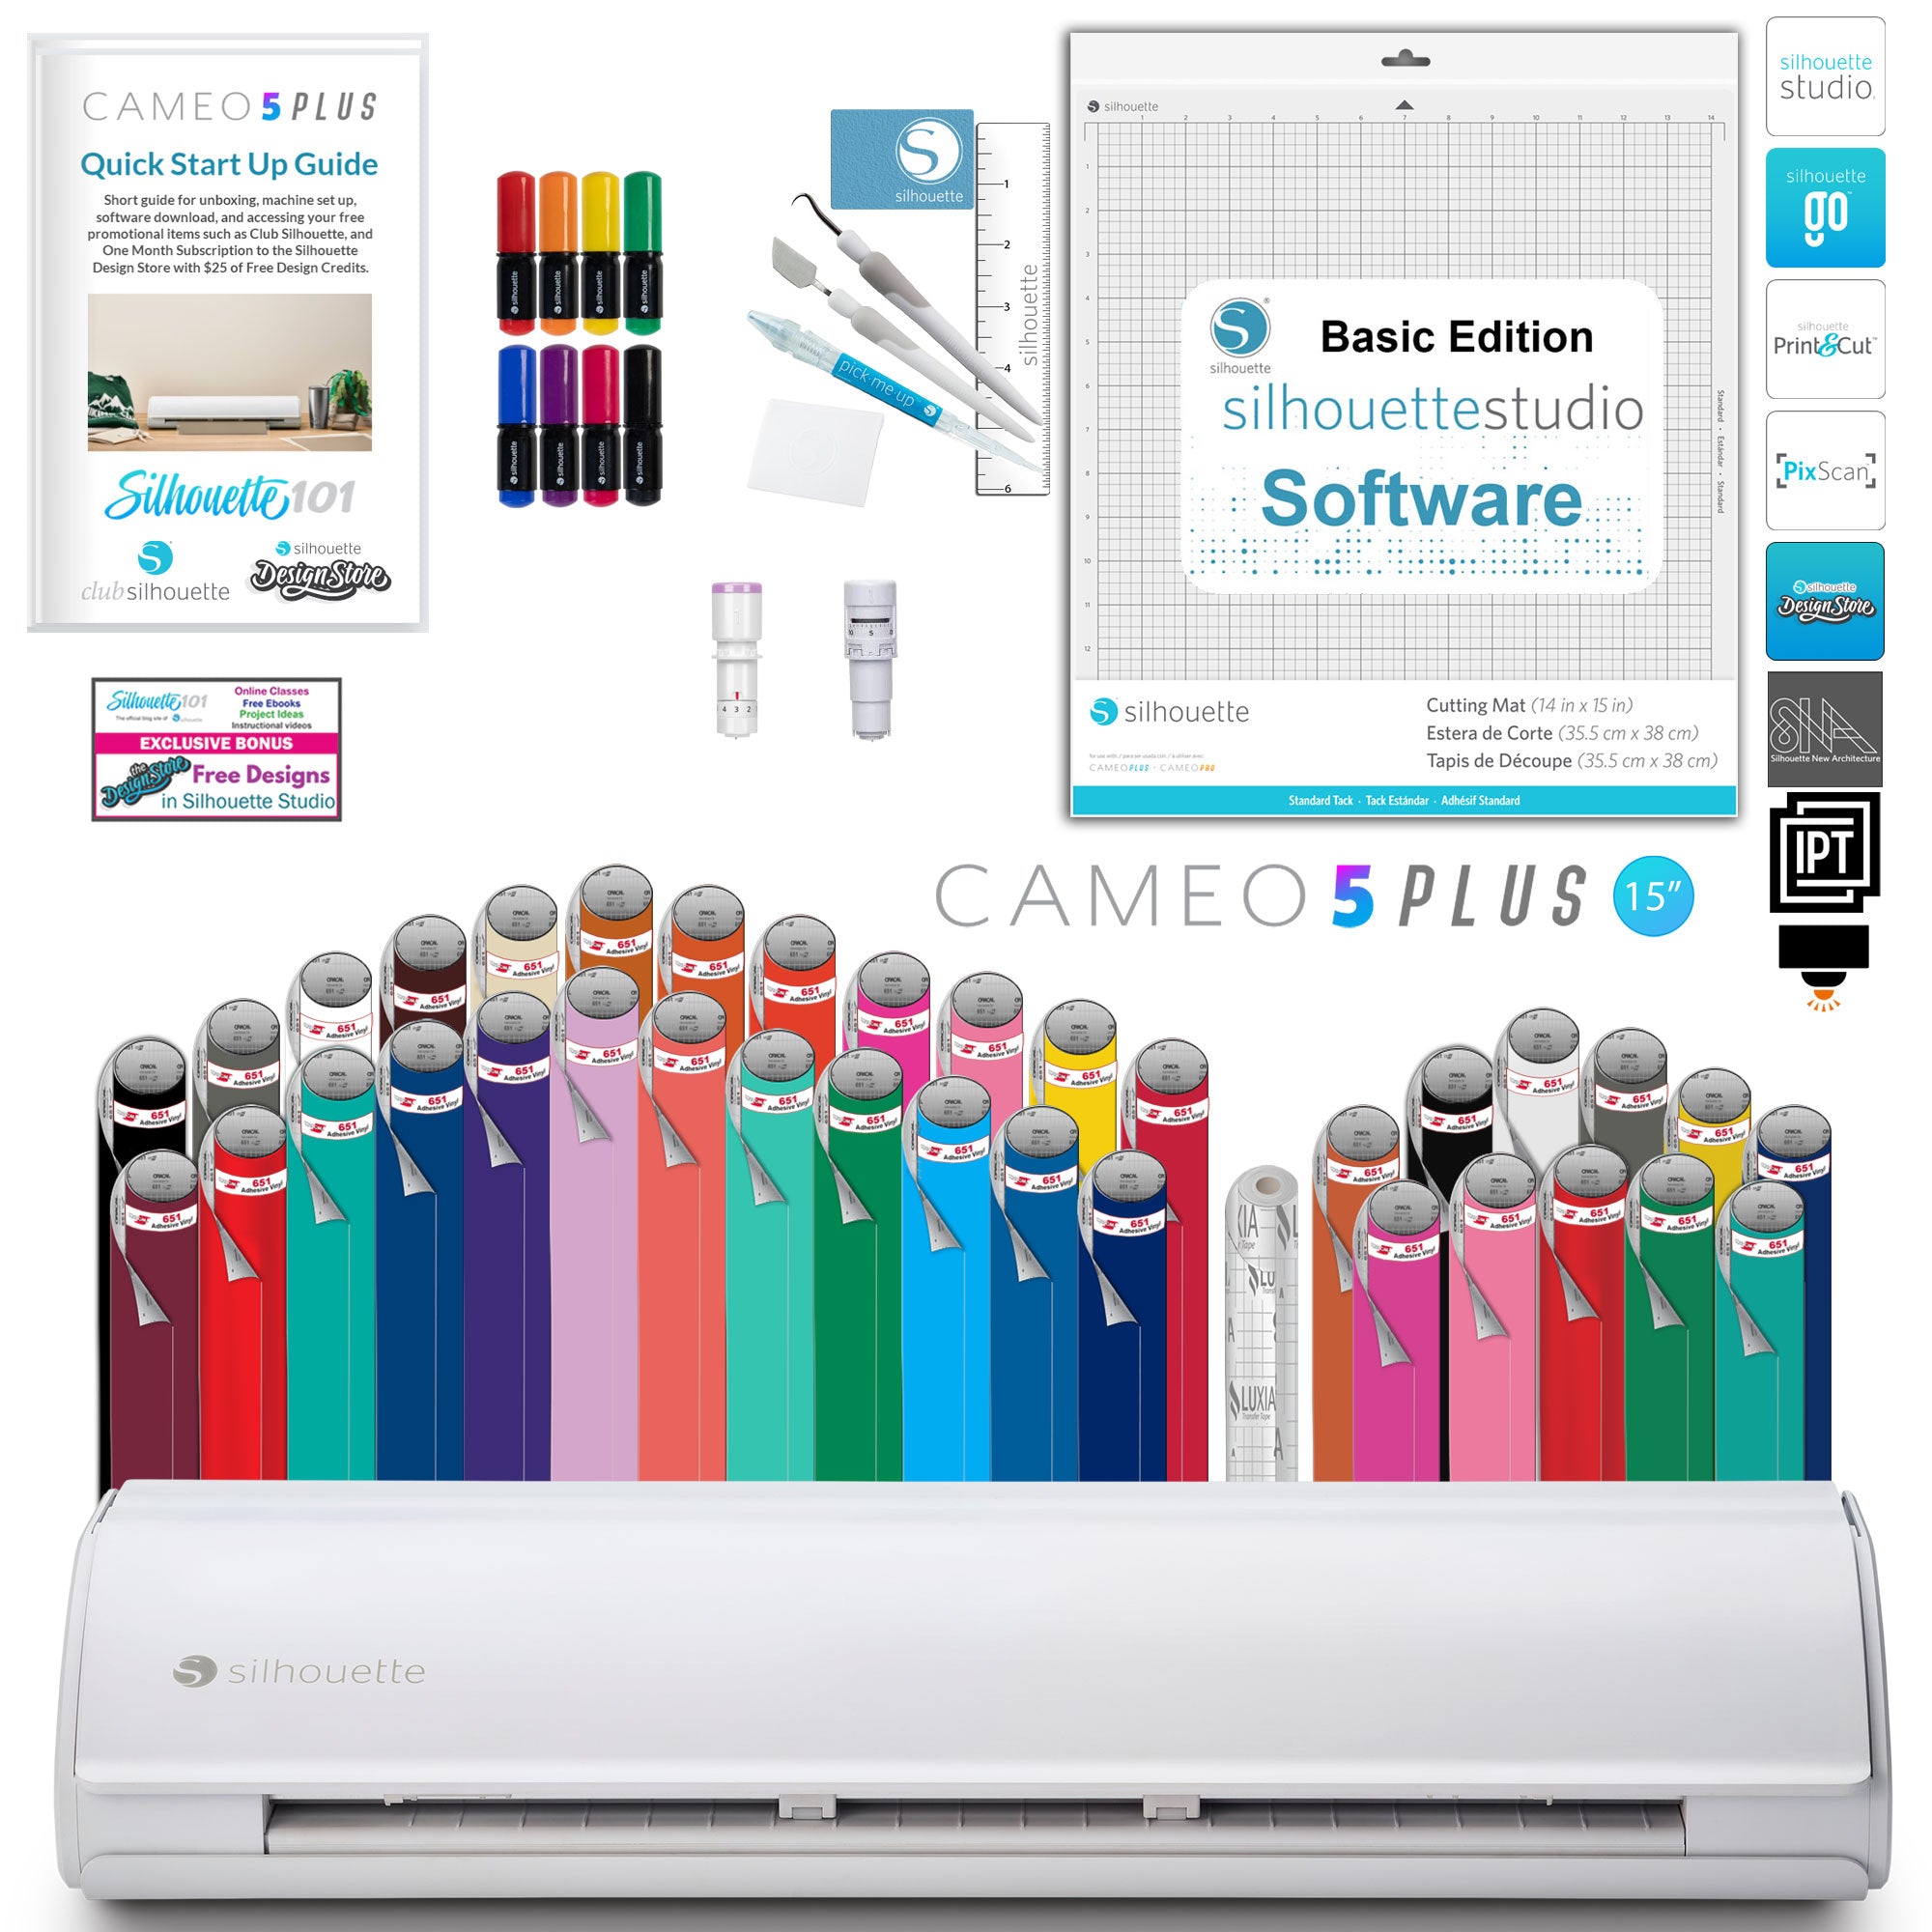 Silhouette America Vinyl Cutters Silhouette Cameo 5 Vinyl Bundle- 36 Sheets Of Vinyl, Tool Kit, Premium Blade, Pens, and Cameo 5 Start Up Guide With Bonus Designs- PLUS Edition